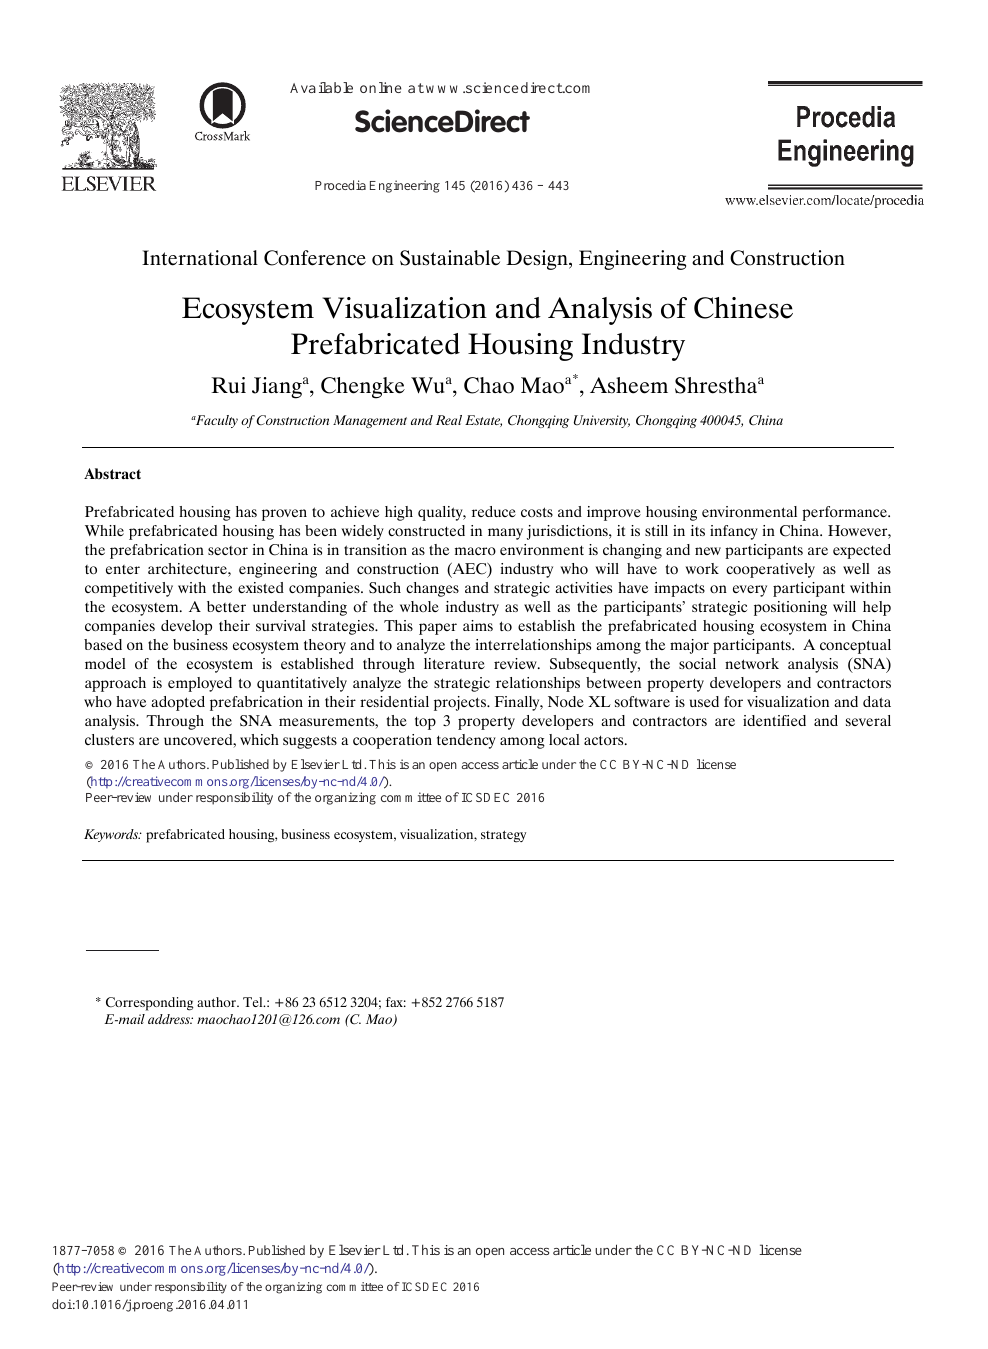 Ecosystem Visualization And Analysis Of Chinese Prefabricated Housing Industry Topic Of Research Paper In Economics And Business Download Scholarly Article Pdf And Read For Free On Cyberleninka Open Science Hub